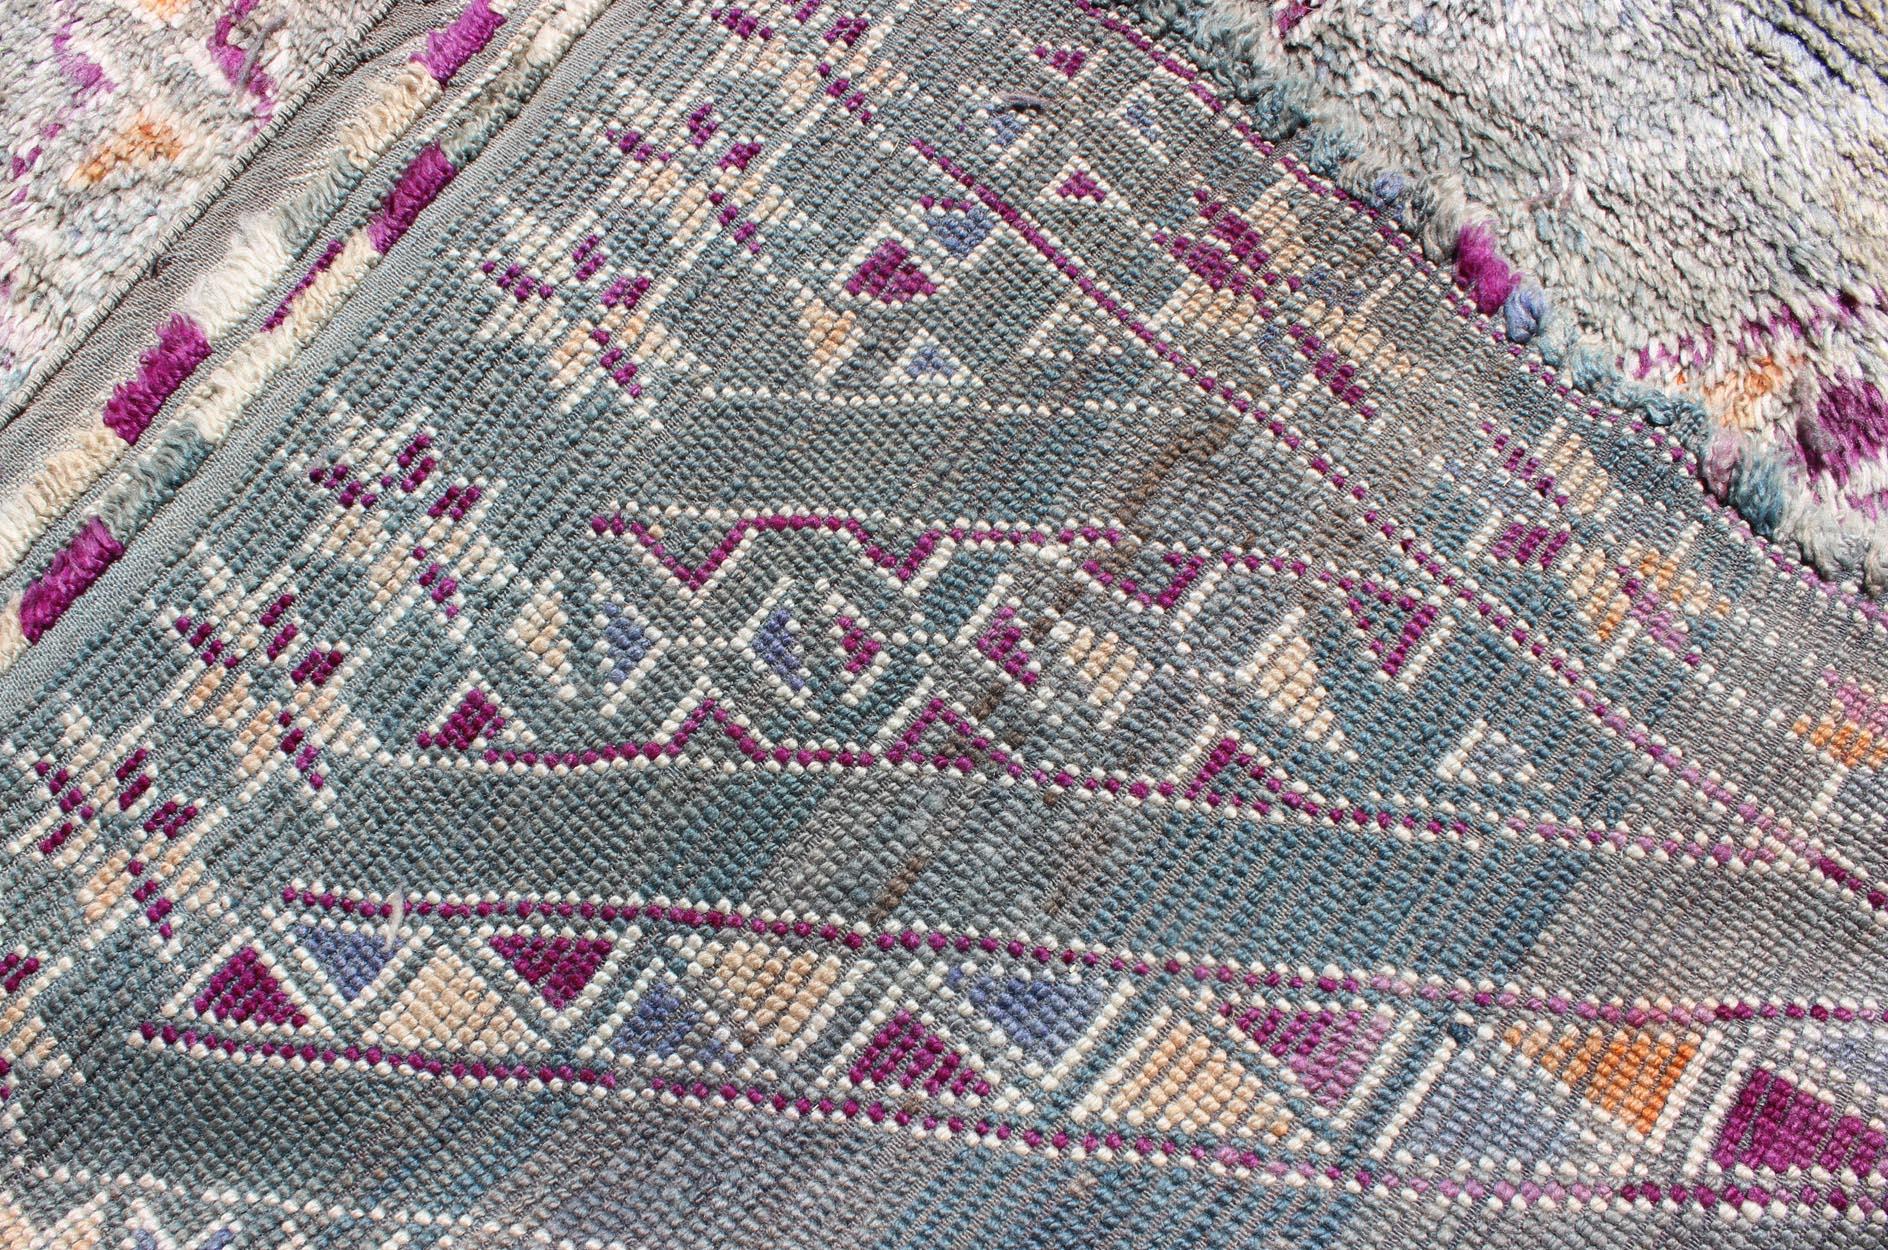 Vintage Moroccan Rug with All-Over Tribal Design in Shades of Blueish/Green For Sale 4